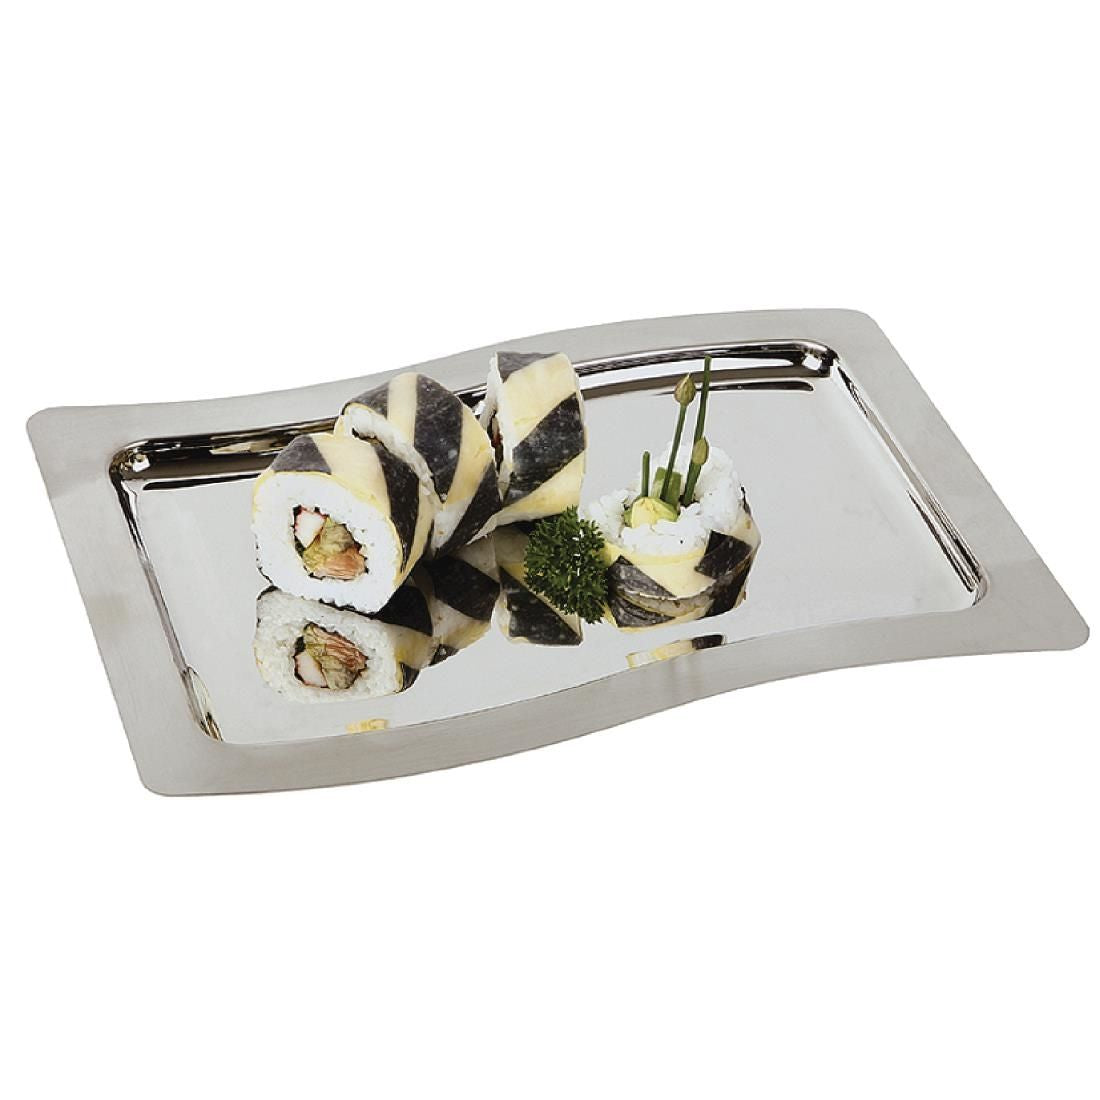 APS Stainless Steel Service Display Tray 285mm JD Catering Equipment Solutions Ltd